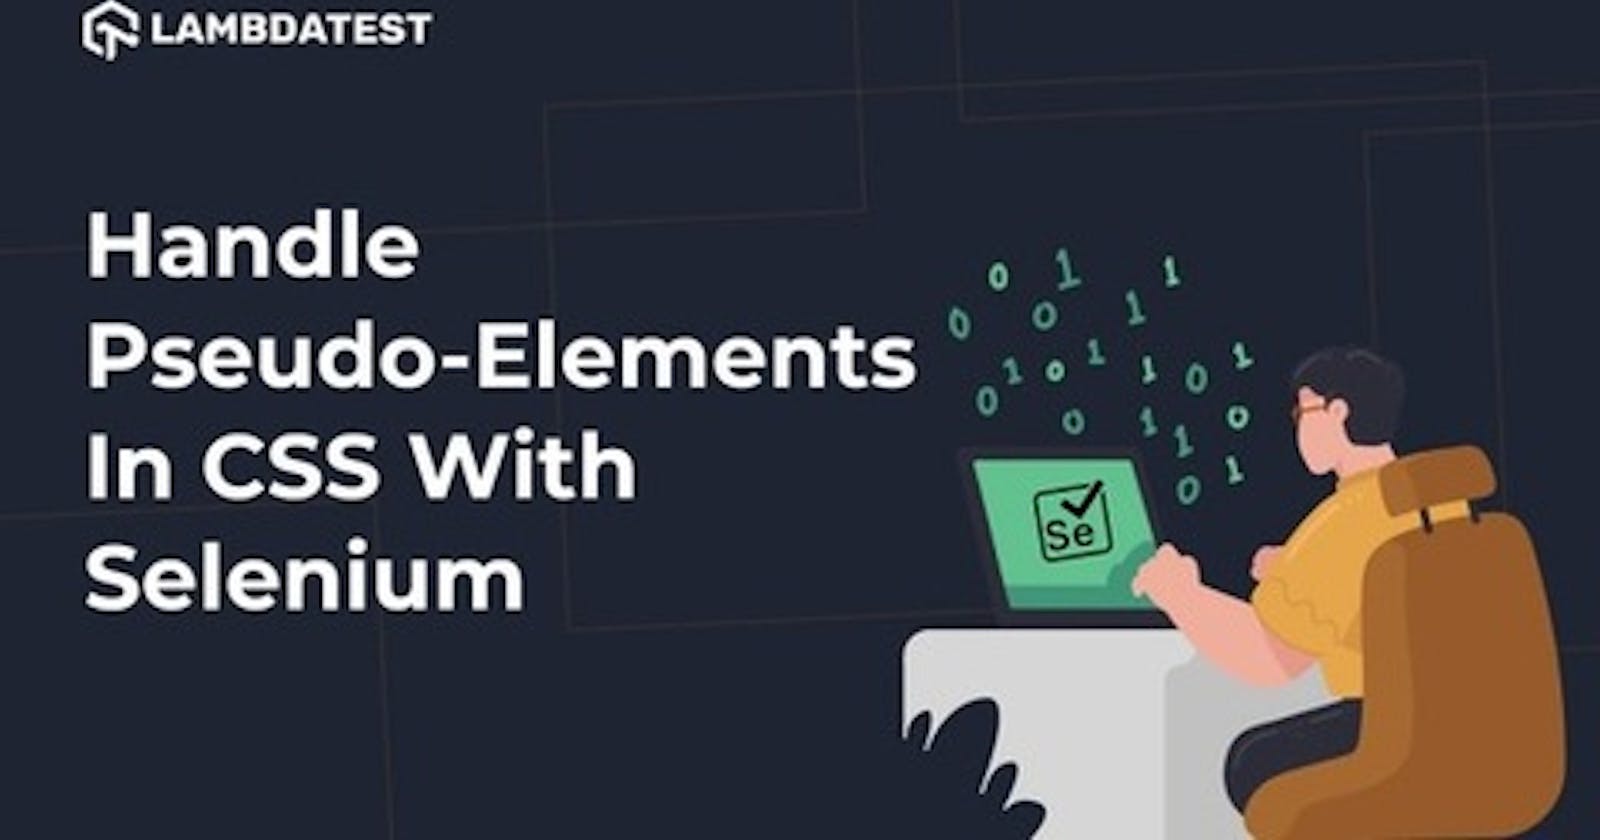 How To Handle Pseudo-Elements In CSS With Selenium?